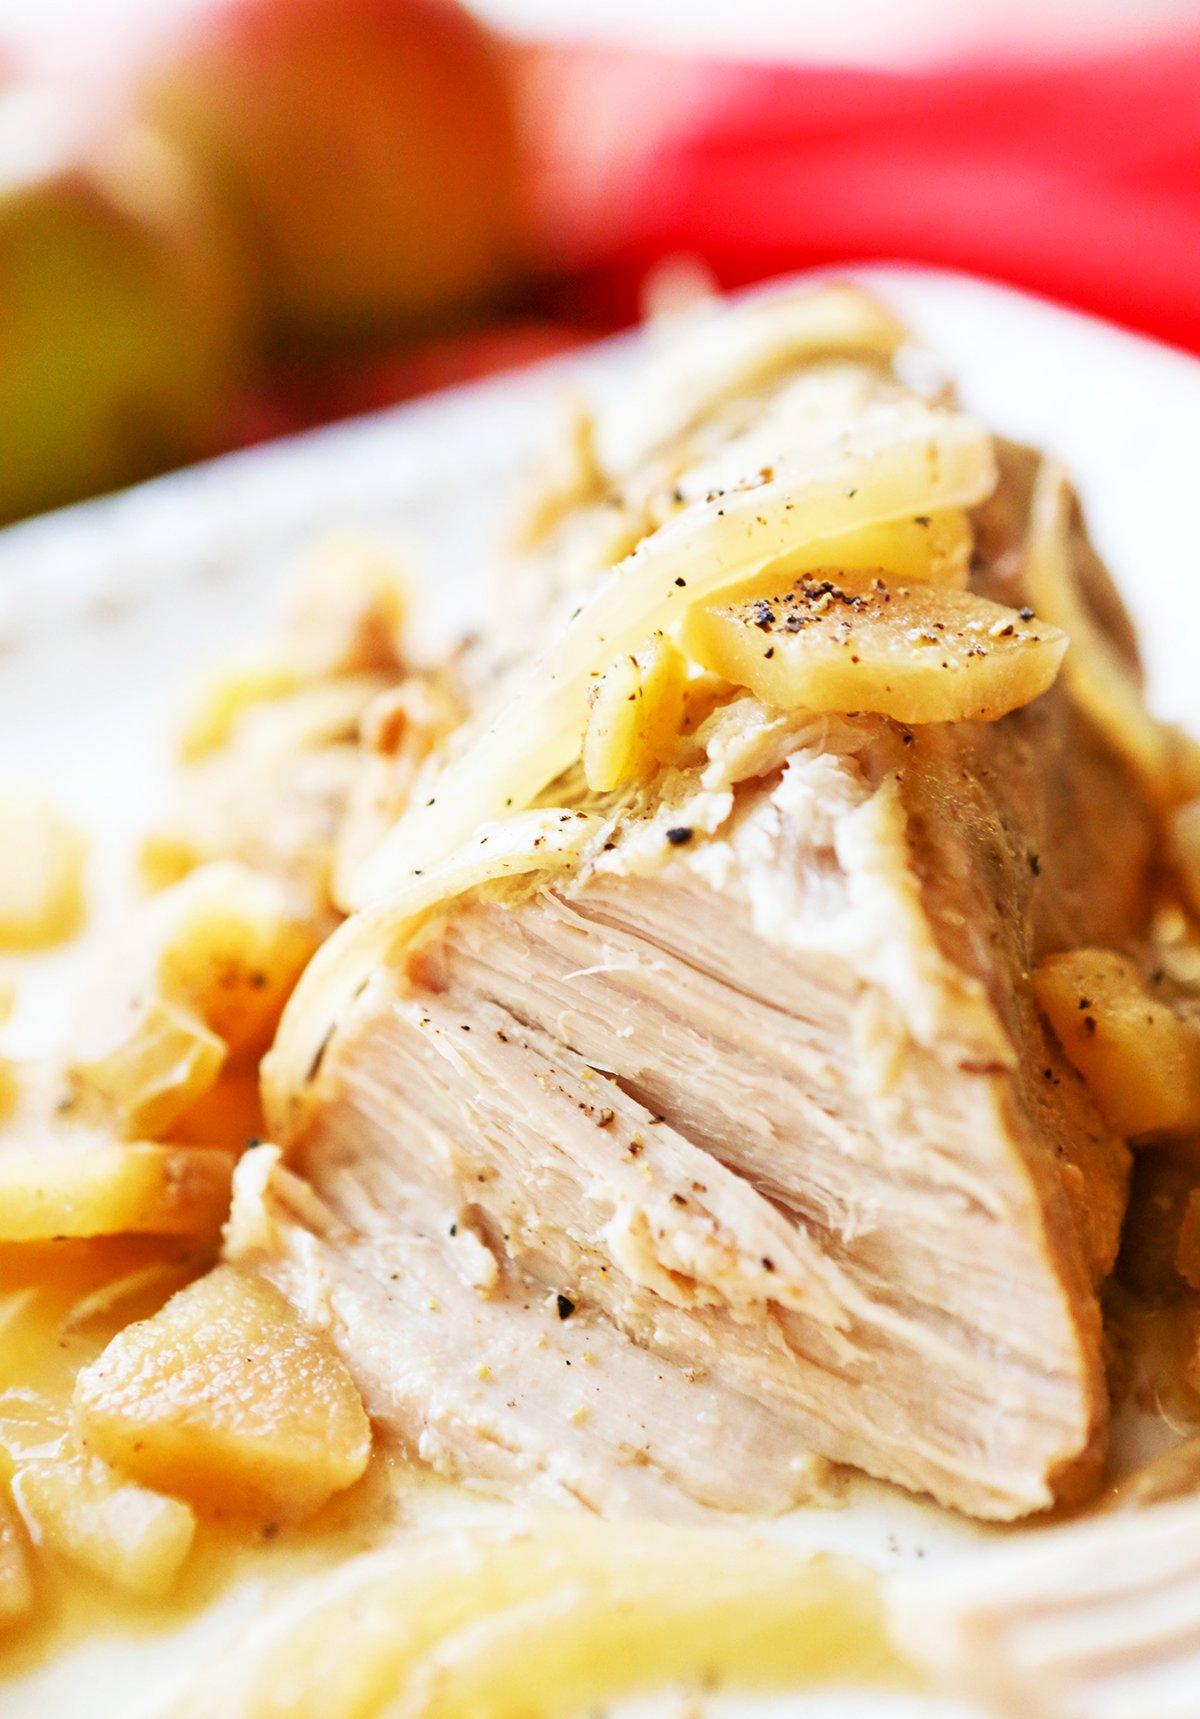 Inside of a pork loin with tender meat and topped with onions and apples.